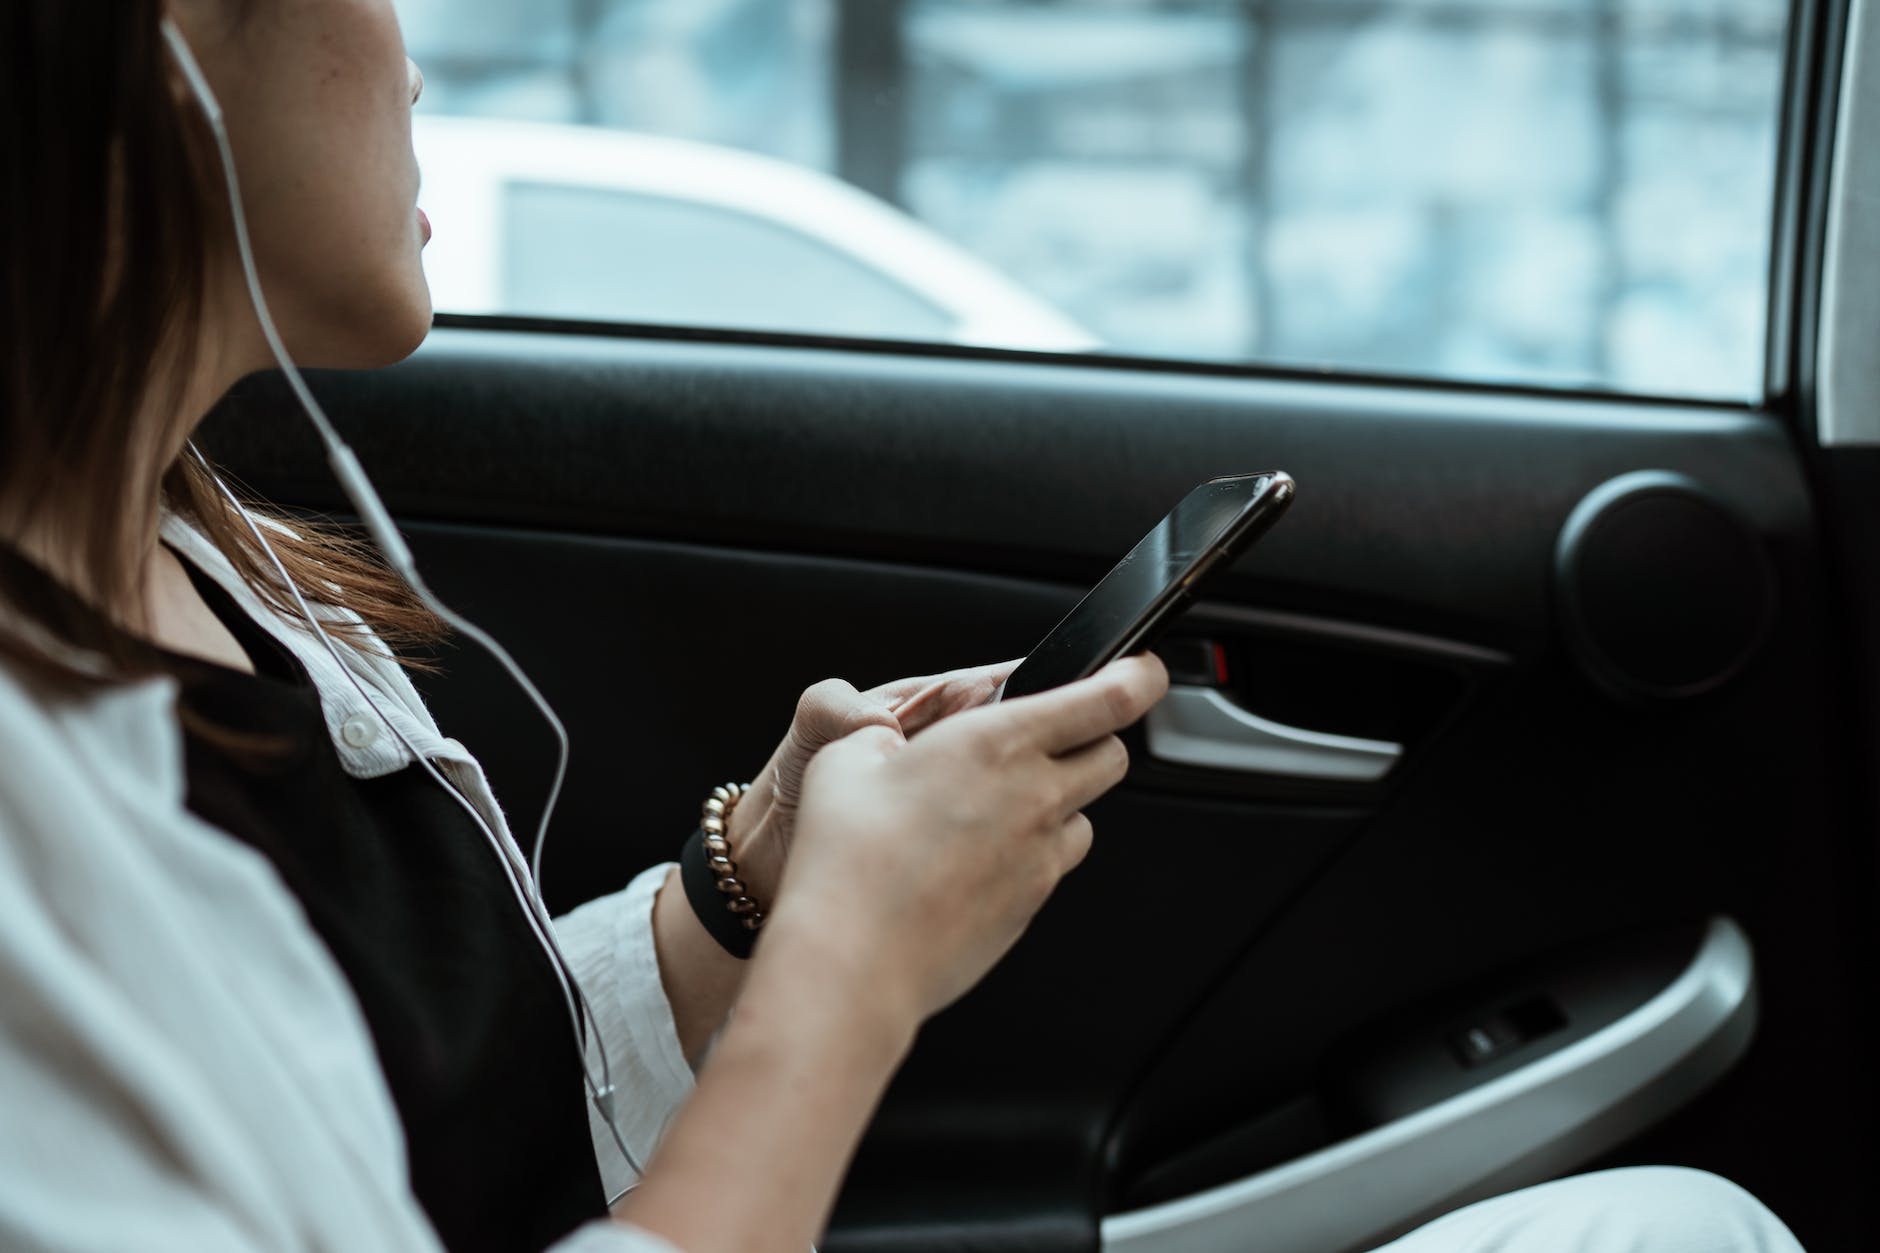 crop unrecognizable woman listening to music on smartphone in car